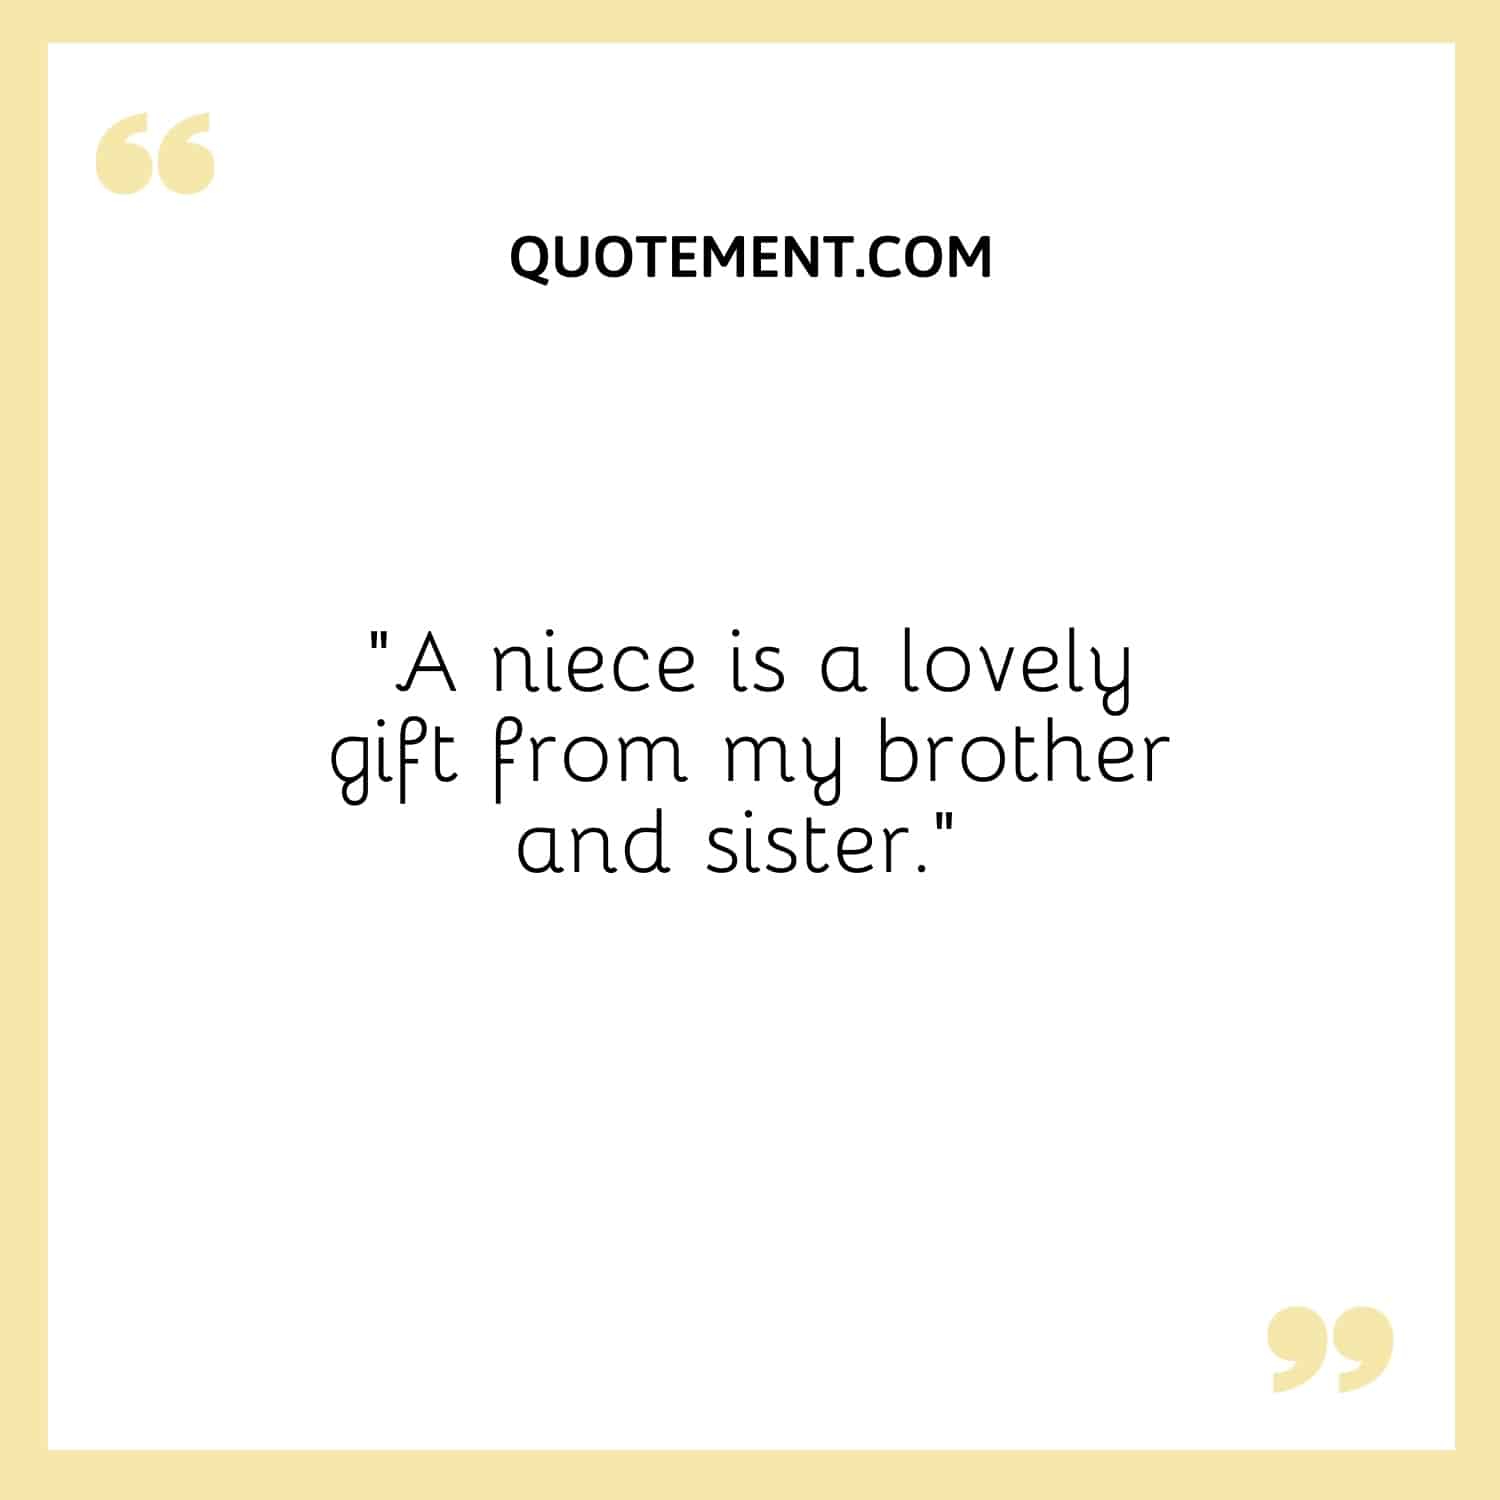 “A niece is a lovely gift from my brother and sister.”